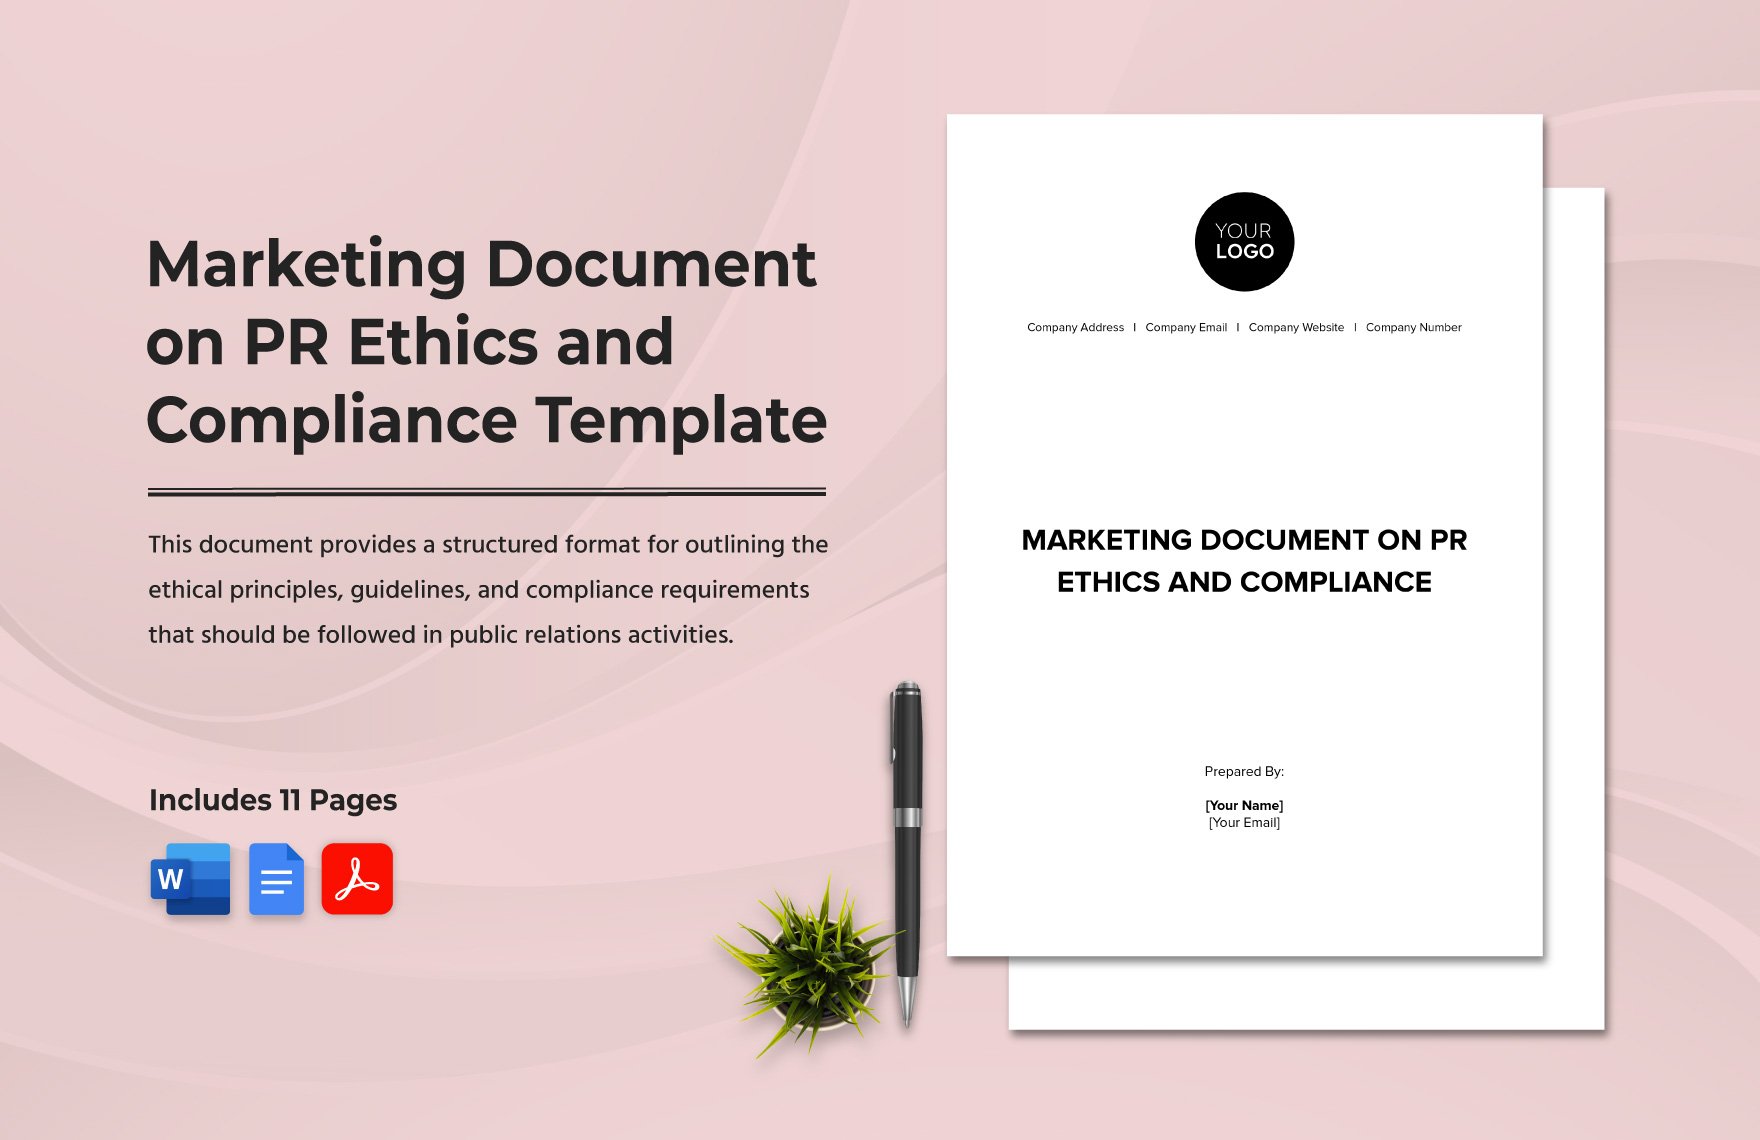 Marketing Document on PR Ethics and Compliance Template 